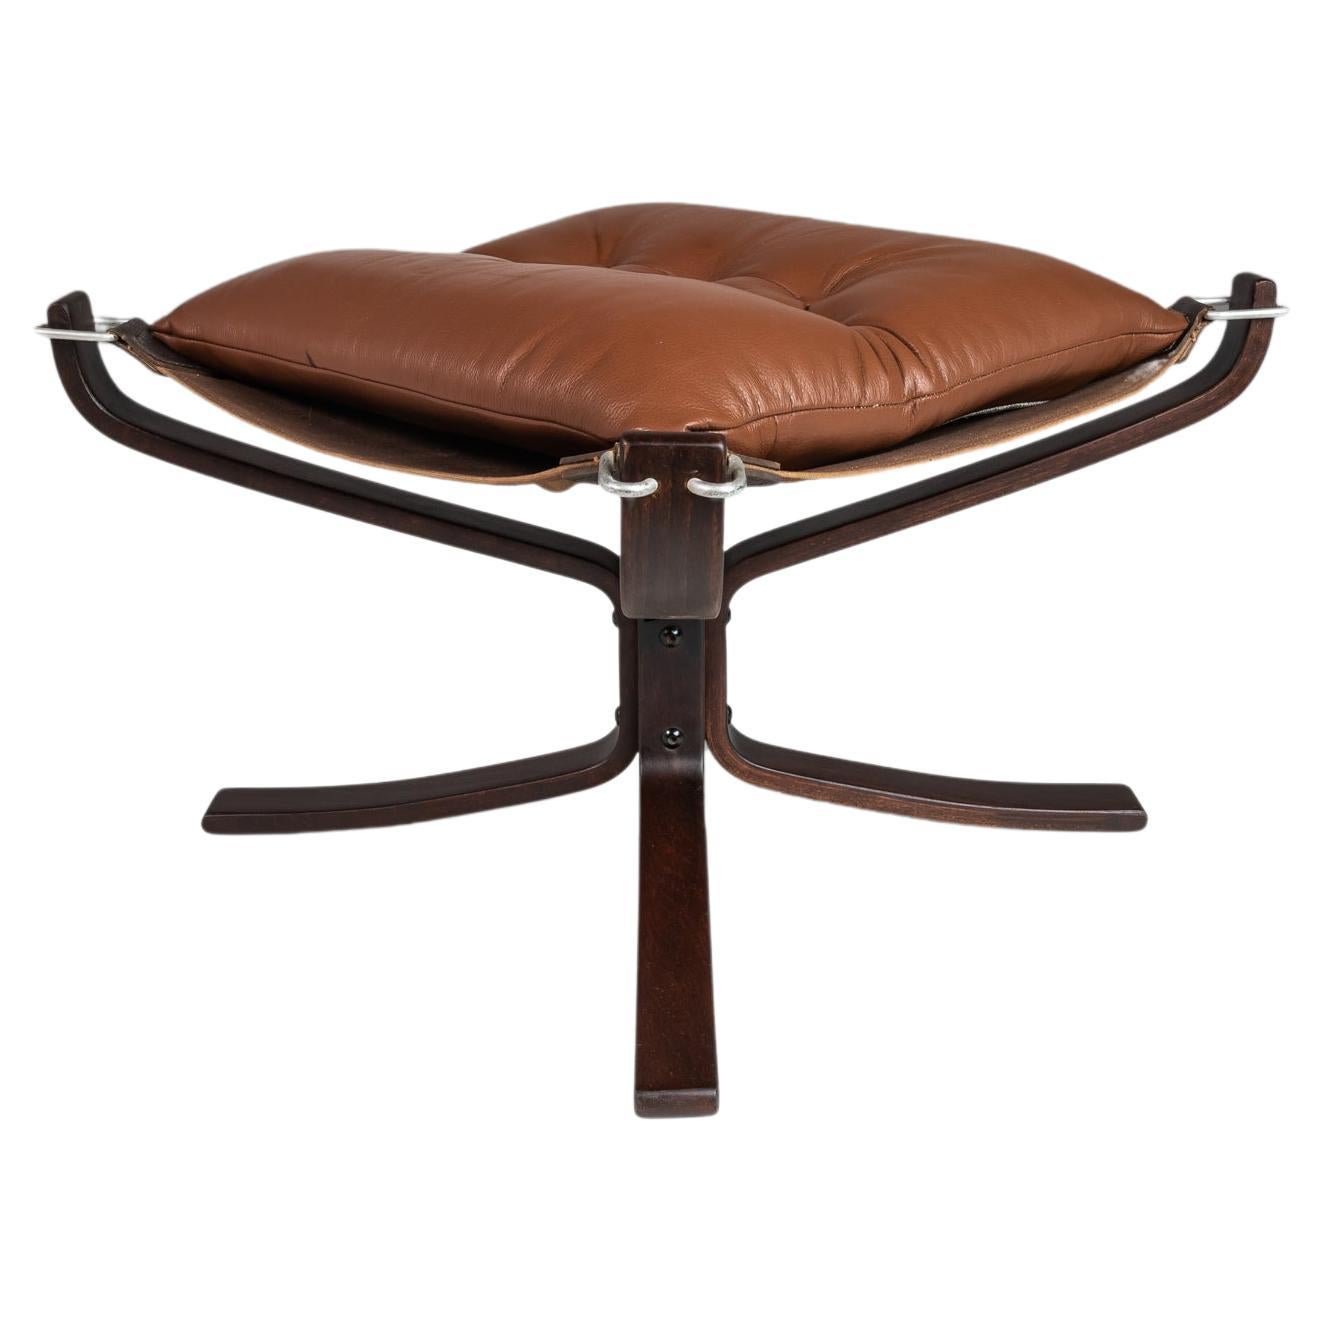 Ottoman for Falcon Chair in Leather by Sigurd Ressel for Vatne Møbler, c. 1970's For Sale